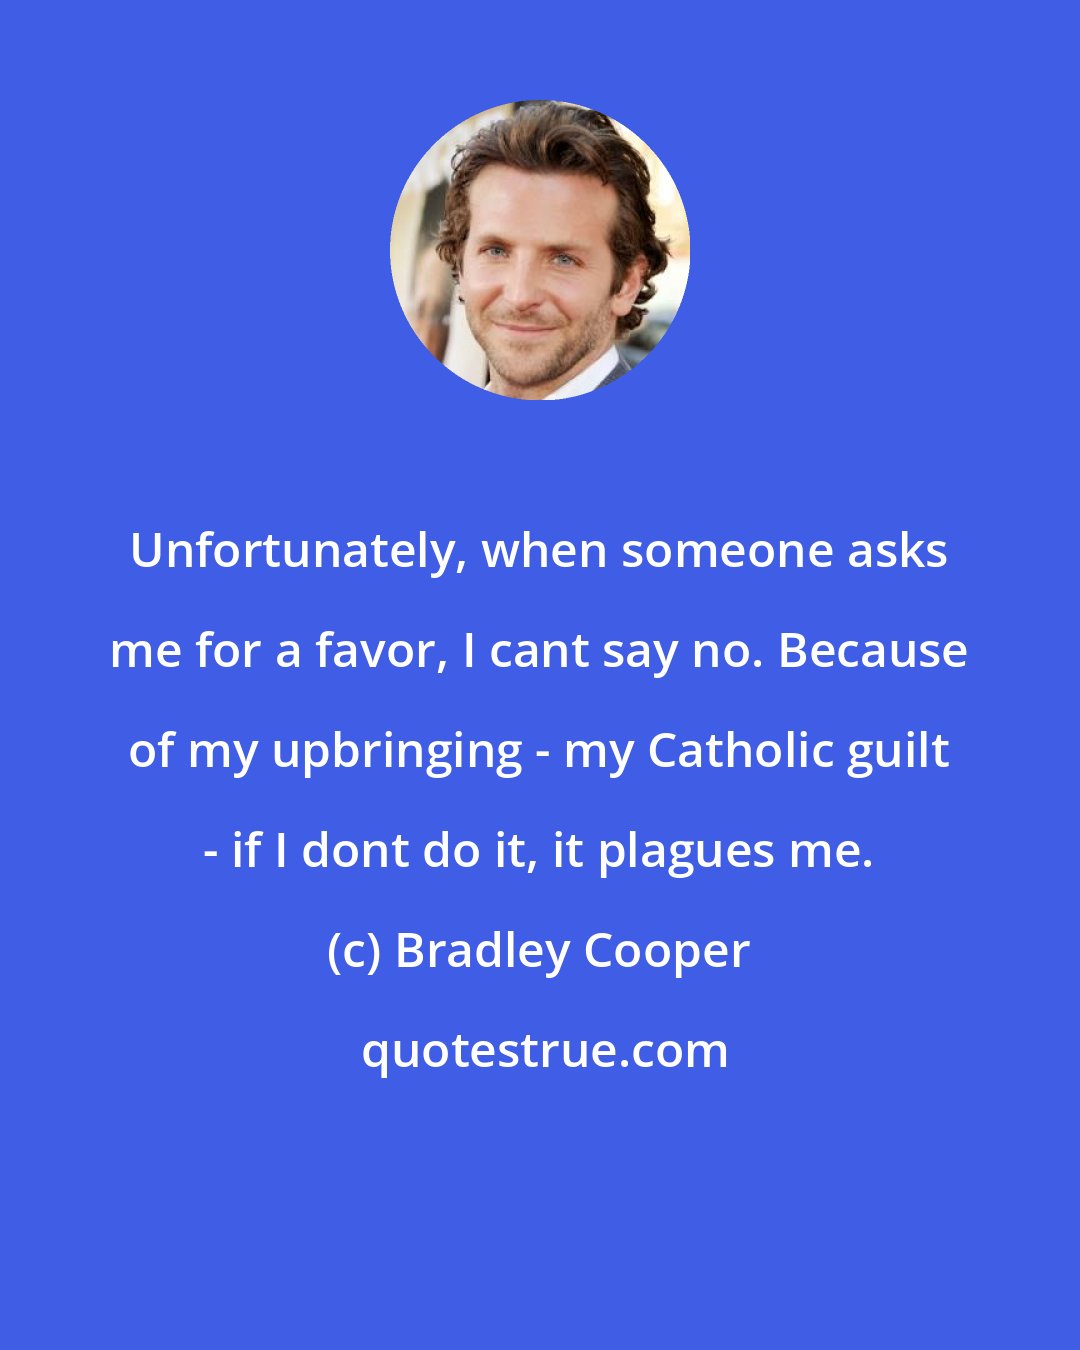 Bradley Cooper: Unfortunately, when someone asks me for a favor, I cant say no. Because of my upbringing - my Catholic guilt - if I dont do it, it plagues me.